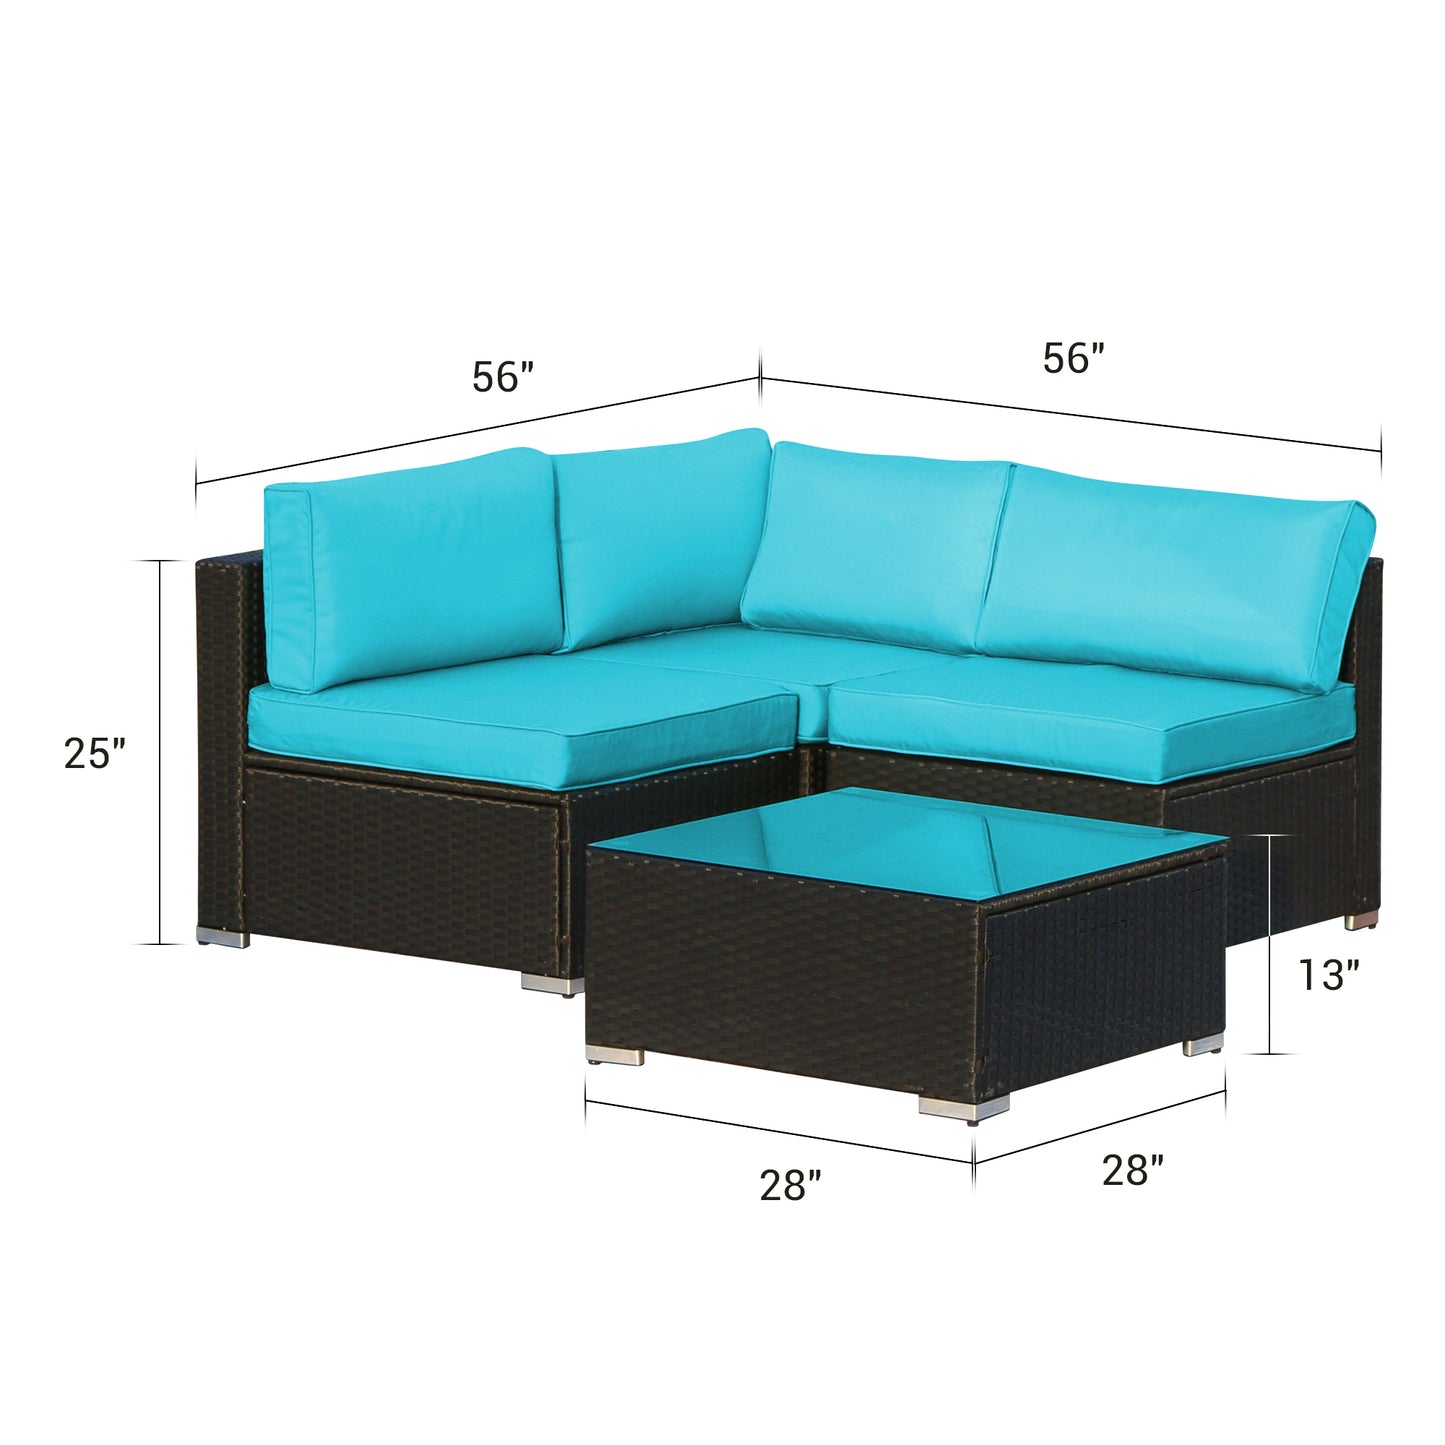 4 Pieces Outdoor Sectional Set with Coffee Table, Turquoise Cushions - Sunvivi